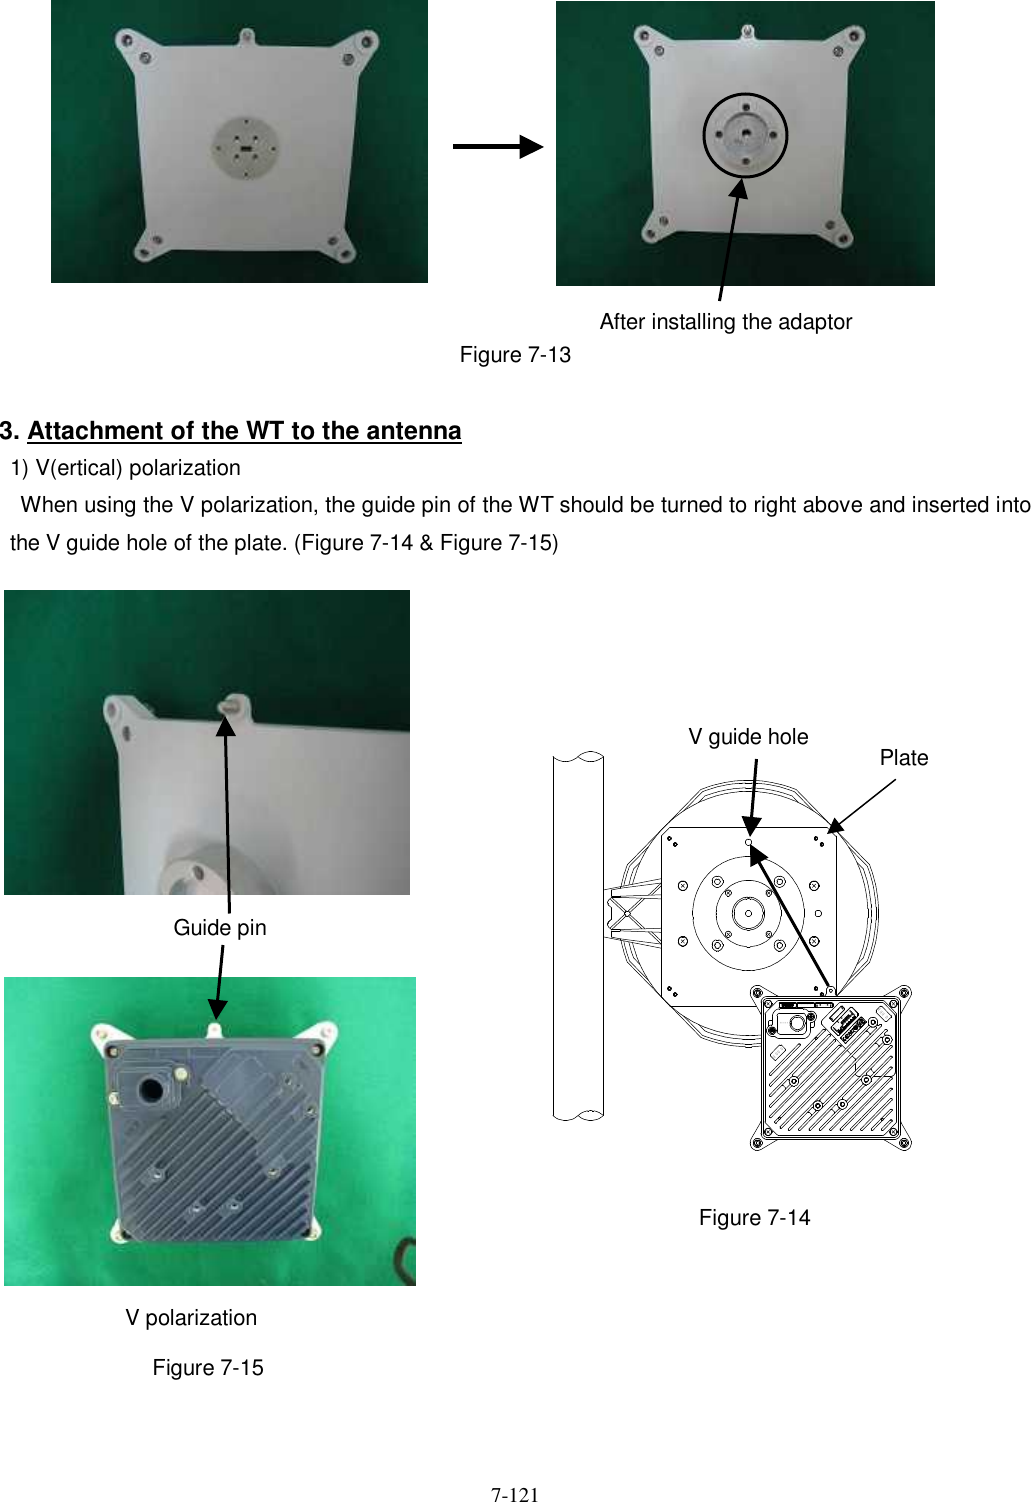   7-121            Figure 7-13  3. Attachment of the WT to the antenna 1) V(ertical) polarization     When using the V polarization, the guide pin of the WT should be turned to right above and inserted into the V guide hole of the plate. (Figure 7-14 &amp; Figure 7-15)                                  Figure 7-14        Figure 7-15   V polarization Guide pin Ｉ Ｃ： ７６ ８ Ｂ−Ｎ Ｔ Ｇ３ ３７ 注 ５ＴＯＰ ＶＴ ＯＰ ＨＥＴ Ｈ ＥＲＩＮＰＵ Ｔ ：Ｓ Ｅ Ｒ ． Ｎ Ｏ ：Ｍ Ａ Ｃ ：．： ： ： ： ：ＭＡＤＥ ＩＮ ＪＡＰ ＡＮＤＣ２ ４Ｖ ０．７ＡＴＹＰＥＷ −Ｗ Ｔ ＜ 注 １ ＞ＦＣＣＩ Ｄ： Ｃ ＫＥＮＴＧ３３ ７ − 注 １ＷＴ ＥＬ２ＭＯＤＥＬ：ＮＴＧ−３３７注２ＲV guide hole Plate After installing the adaptor 